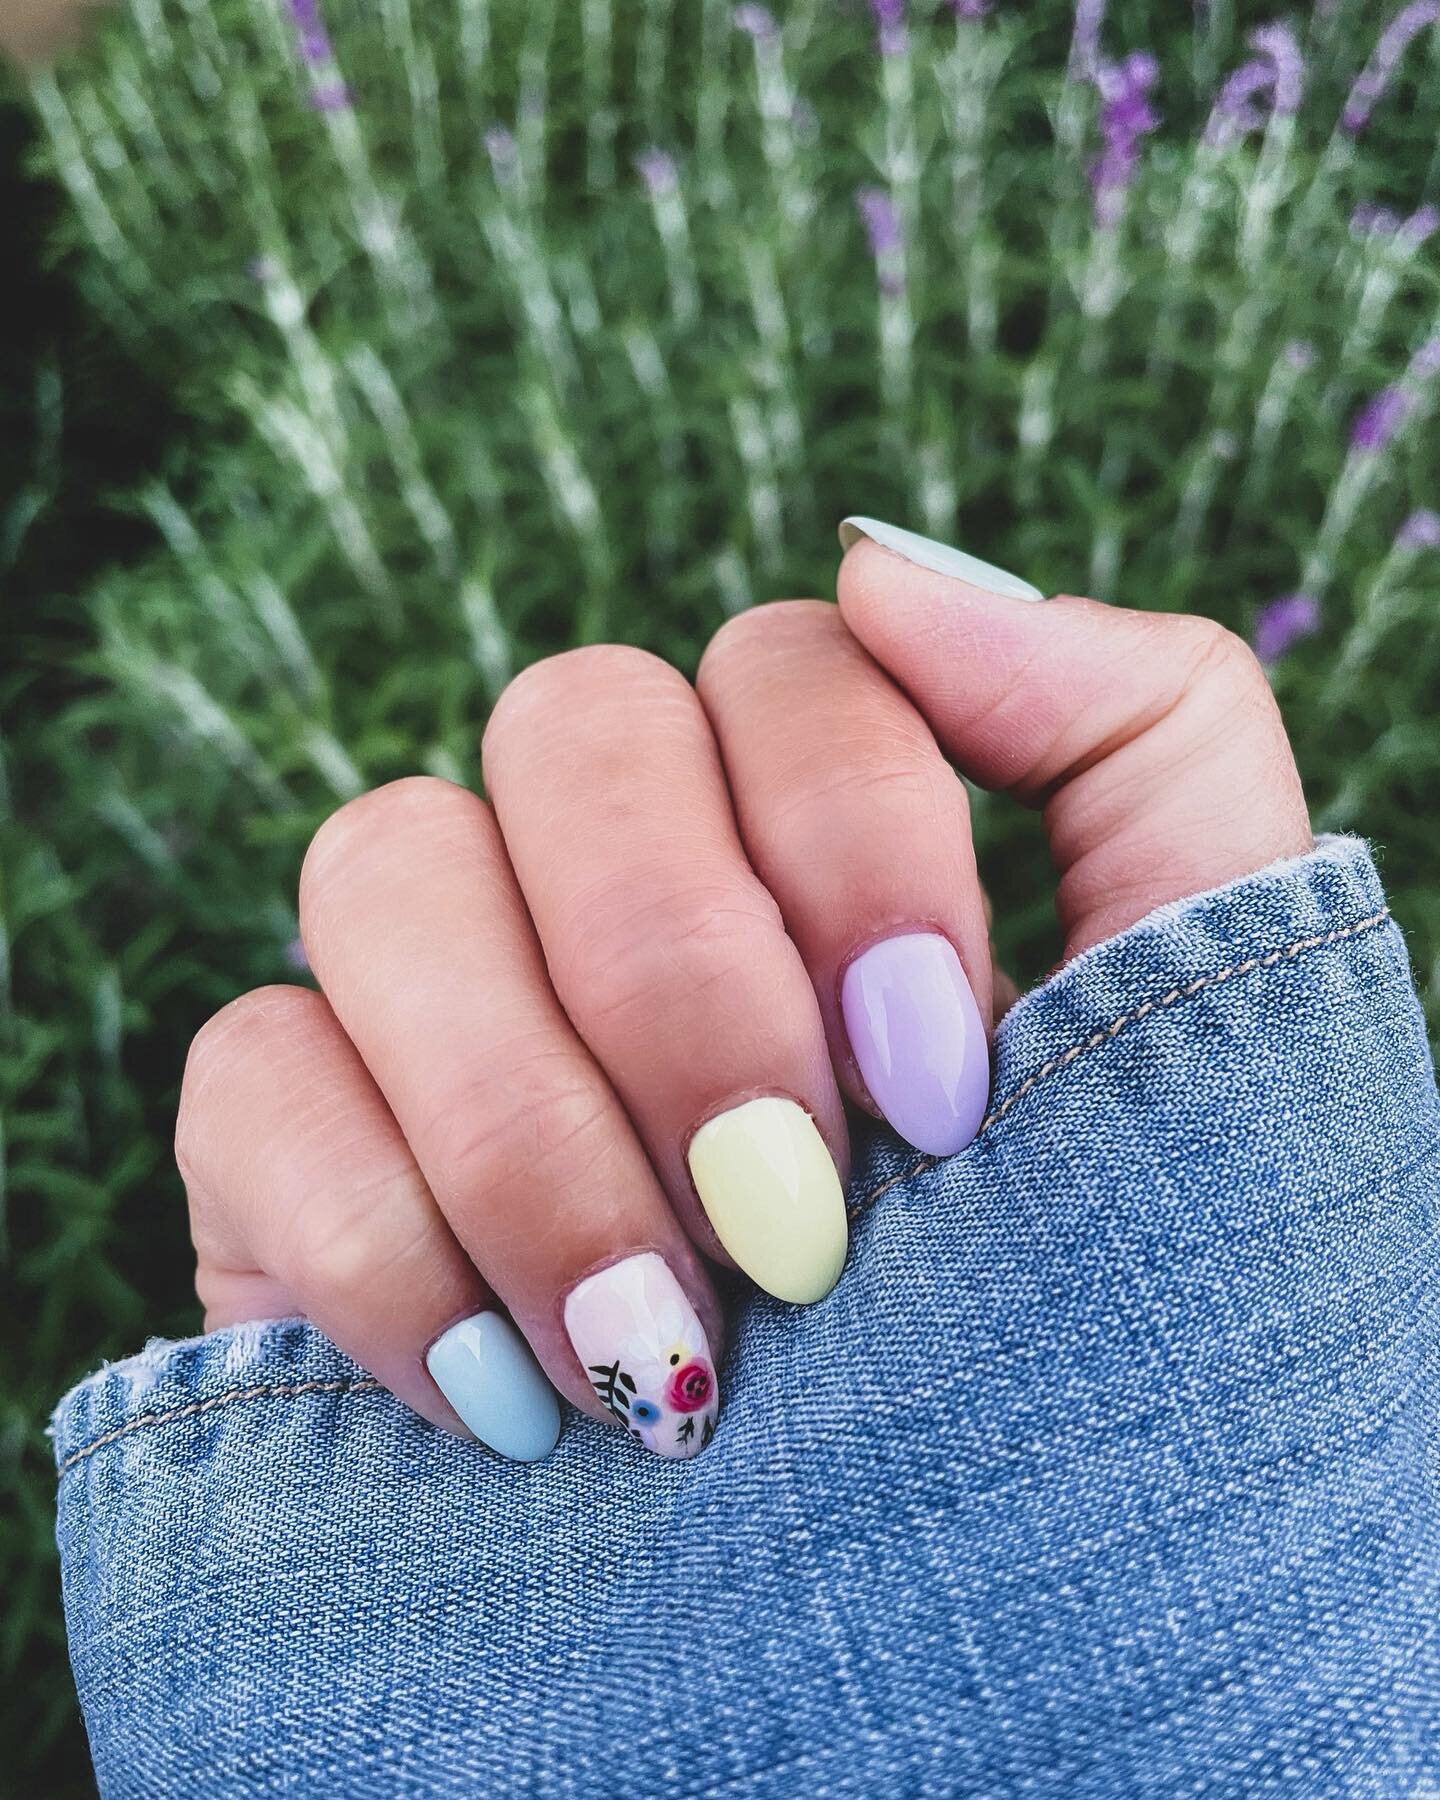 hey, it&rsquo;s ok to smile at the little things 🌸💅🏼 
⠀⠀⠀⠀⠀⠀⠀⠀⠀
Nails by: @queenie_nailart
Inspired by: @kierataylor_nails_
⠀⠀⠀⠀⠀⠀⠀⠀⠀
#springnails #chooseyourtherapy #nailtherapy #mani #gelmanicure #floralnails #handpainted #funnails #nailsoftheda